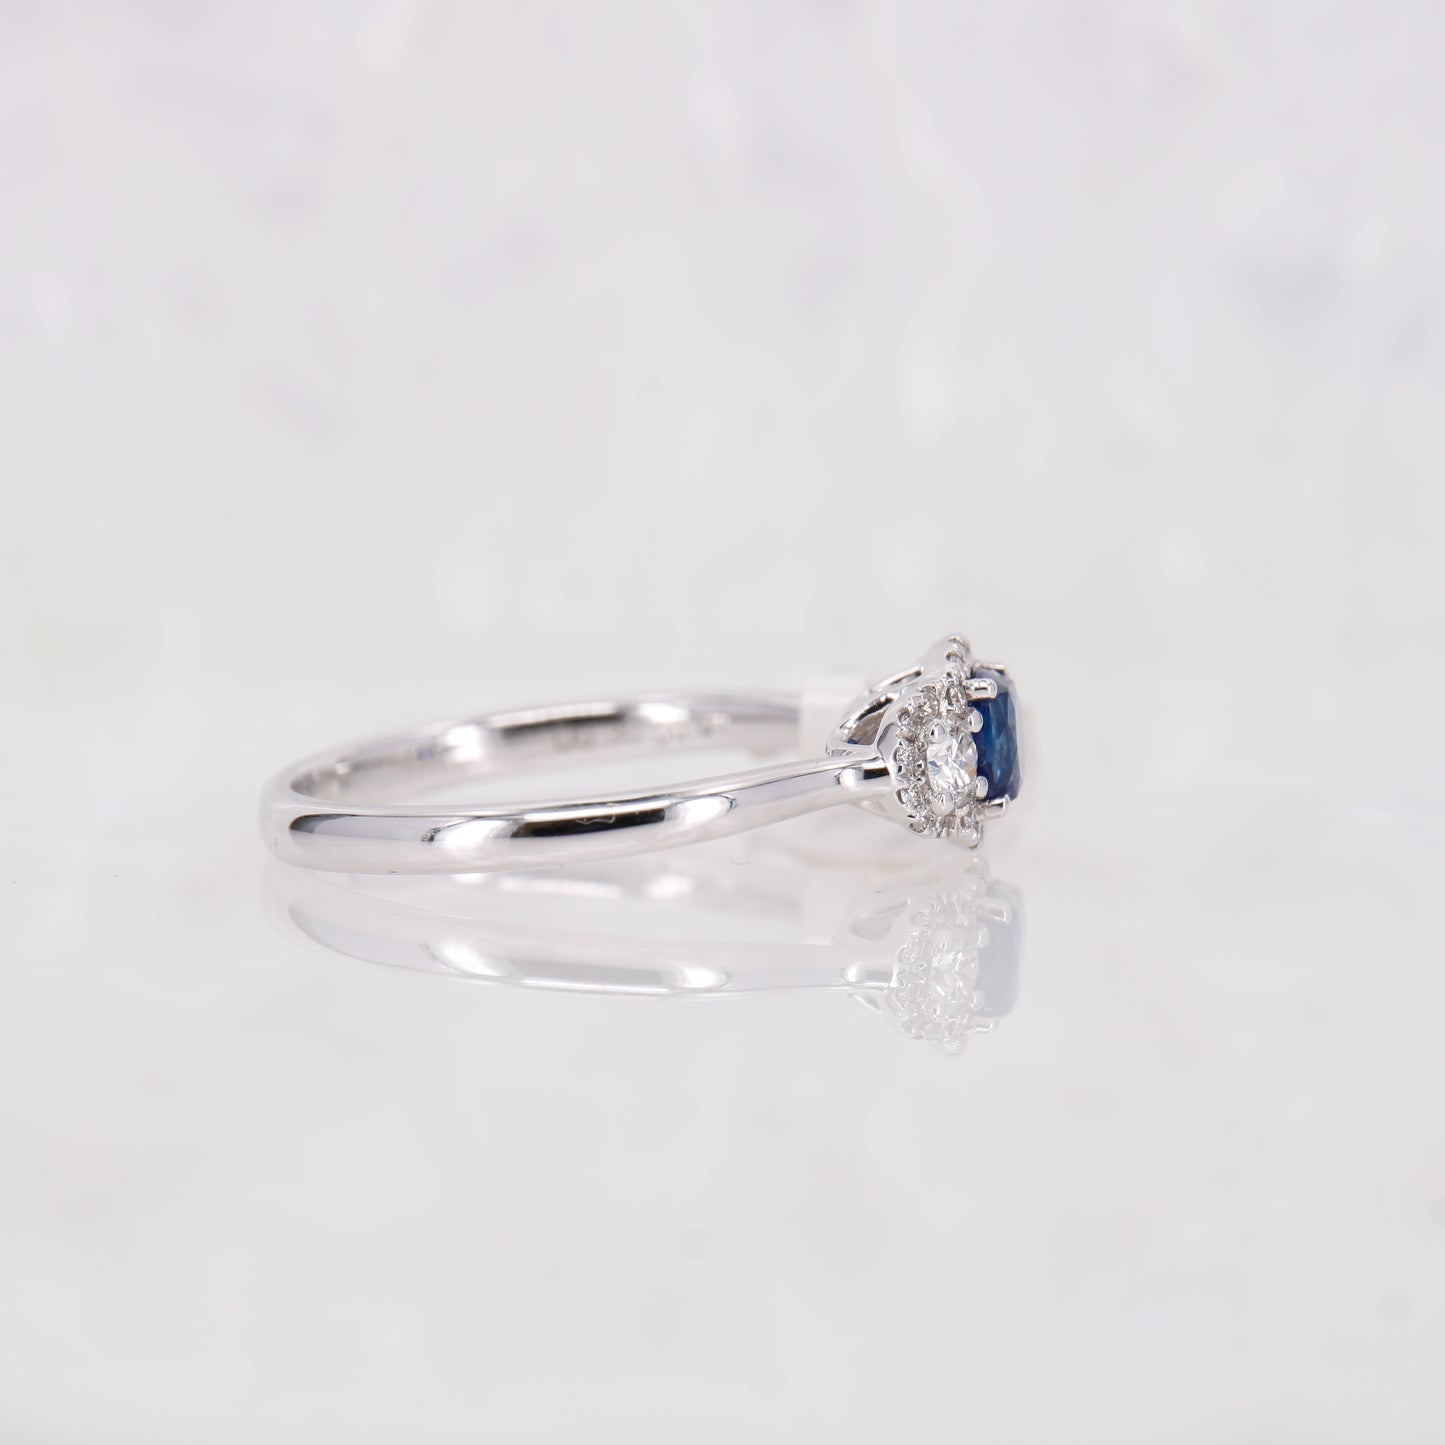 18CT White Gold Sapphire and Diamond three stone ring with a halo of diamonds surrounding. 